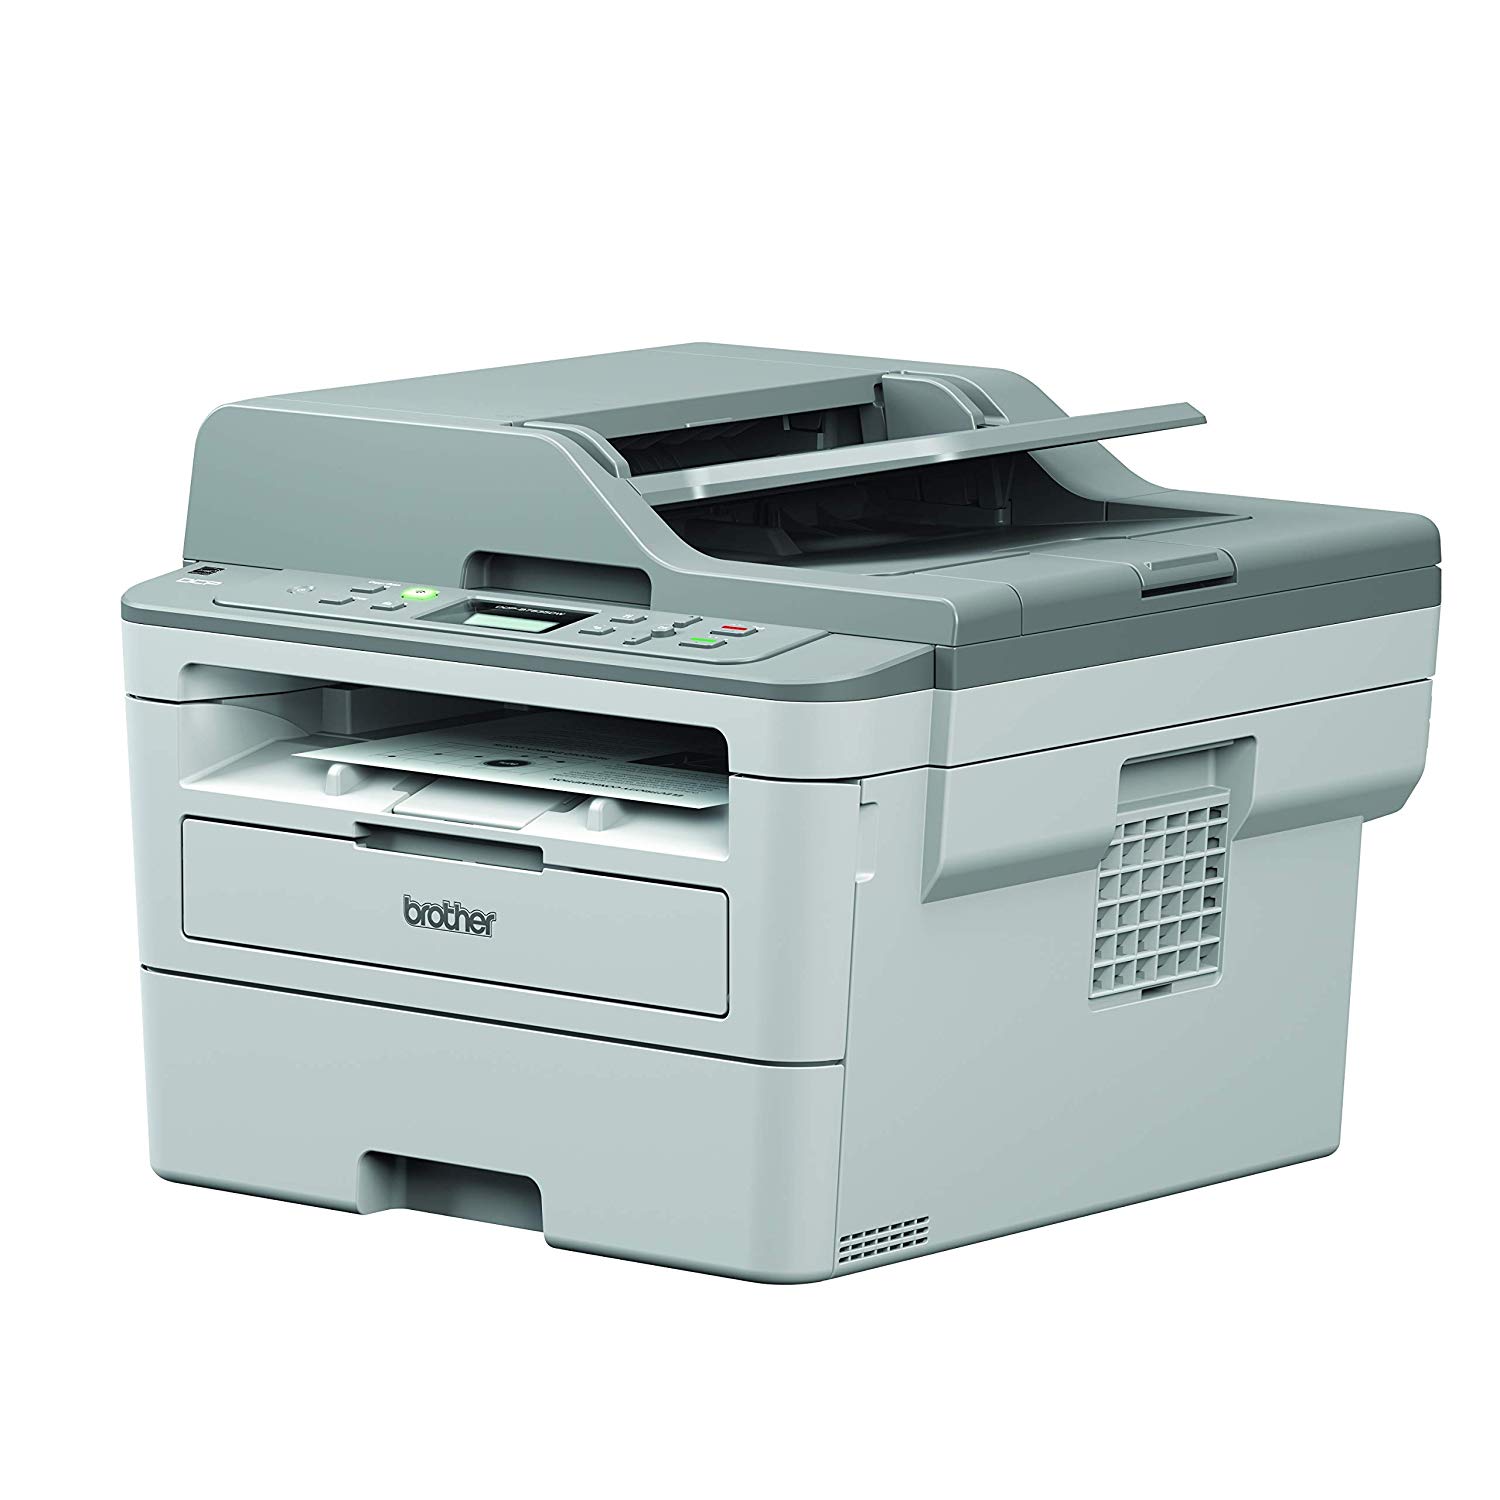 Brother Monochrome Laser Printer DCP-B7535DW Print, Scan, Copy, 34 PPM, 128 MB Memory, 50 Sheets ADF with Duplex,Wi-Fi & Wired Network, Wi-Fi Direct